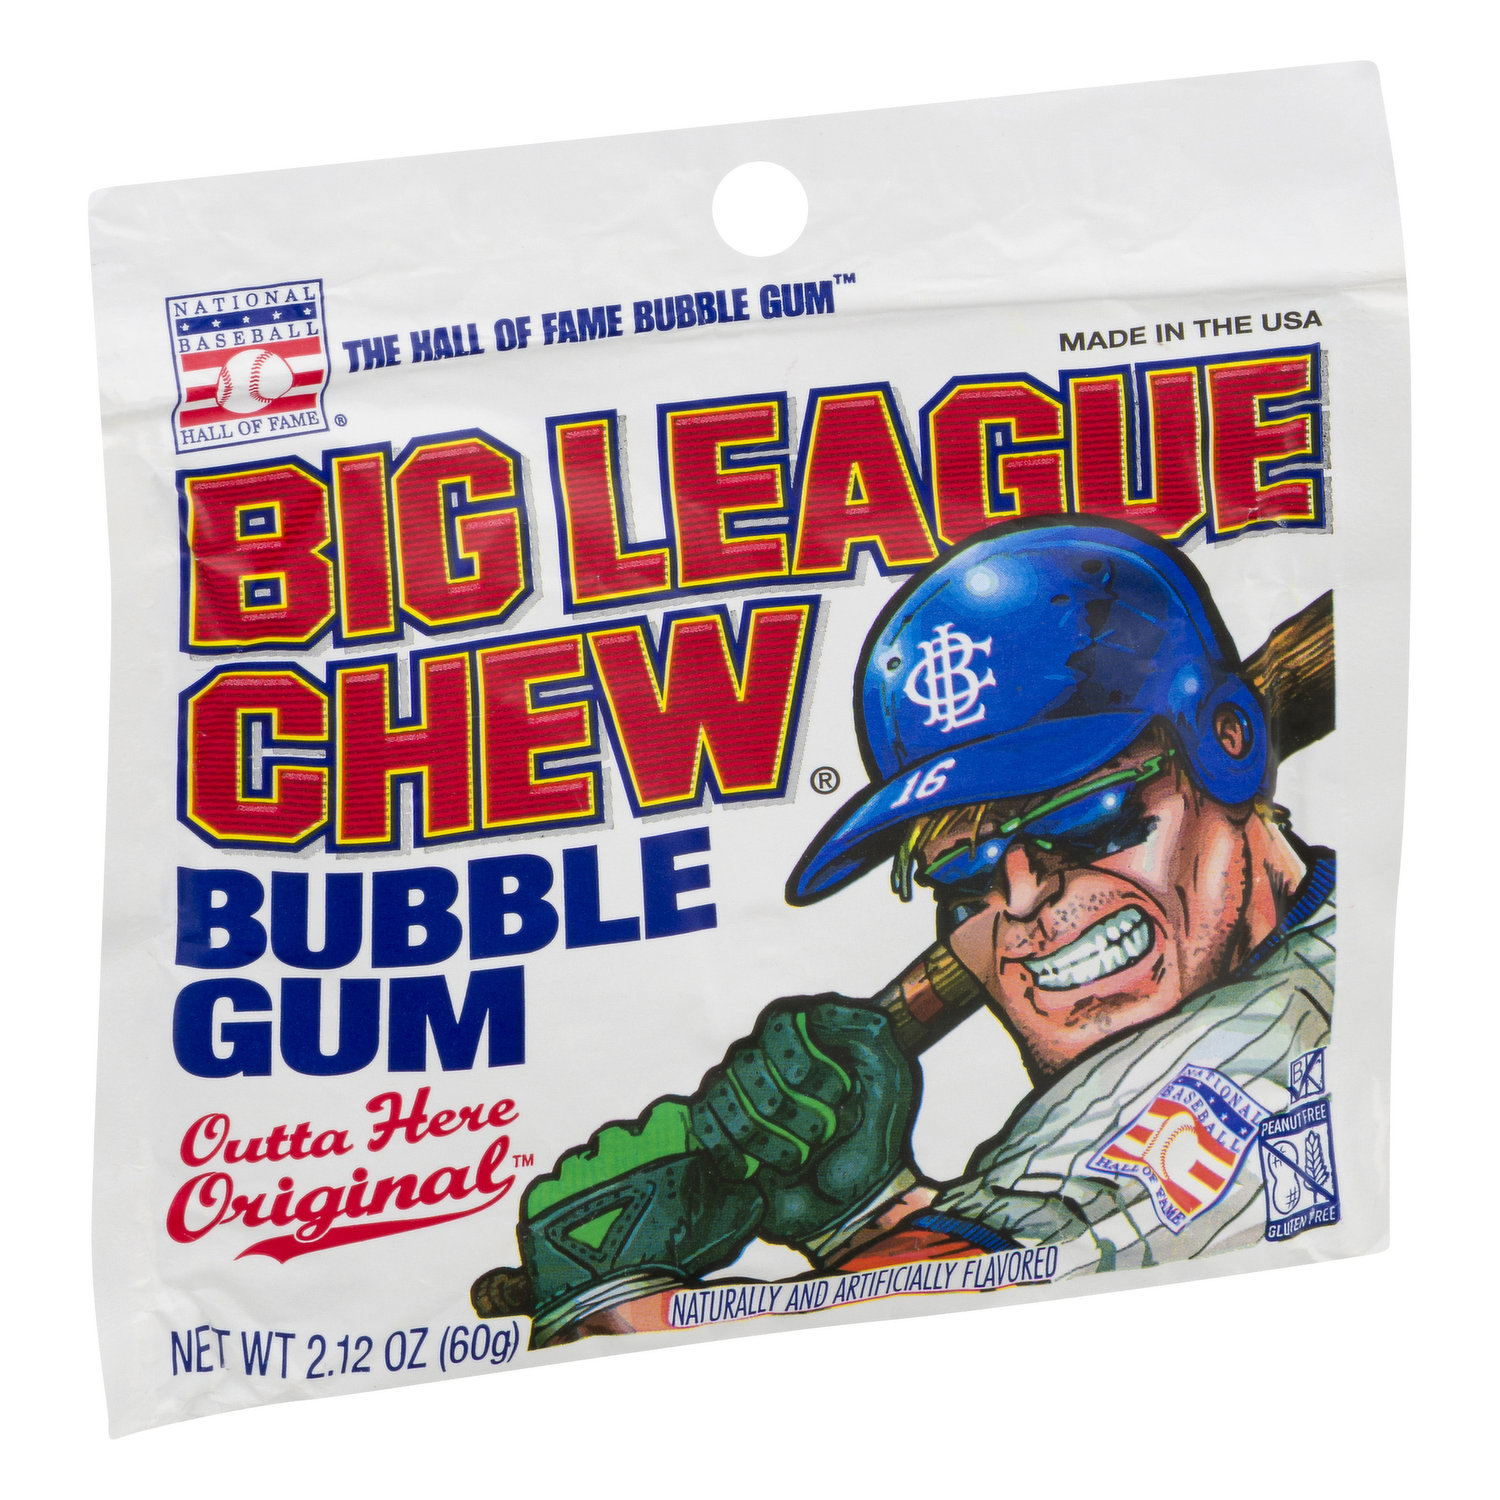 NEW DROP: Big League Chew Hats Hats in every flavor. Available now